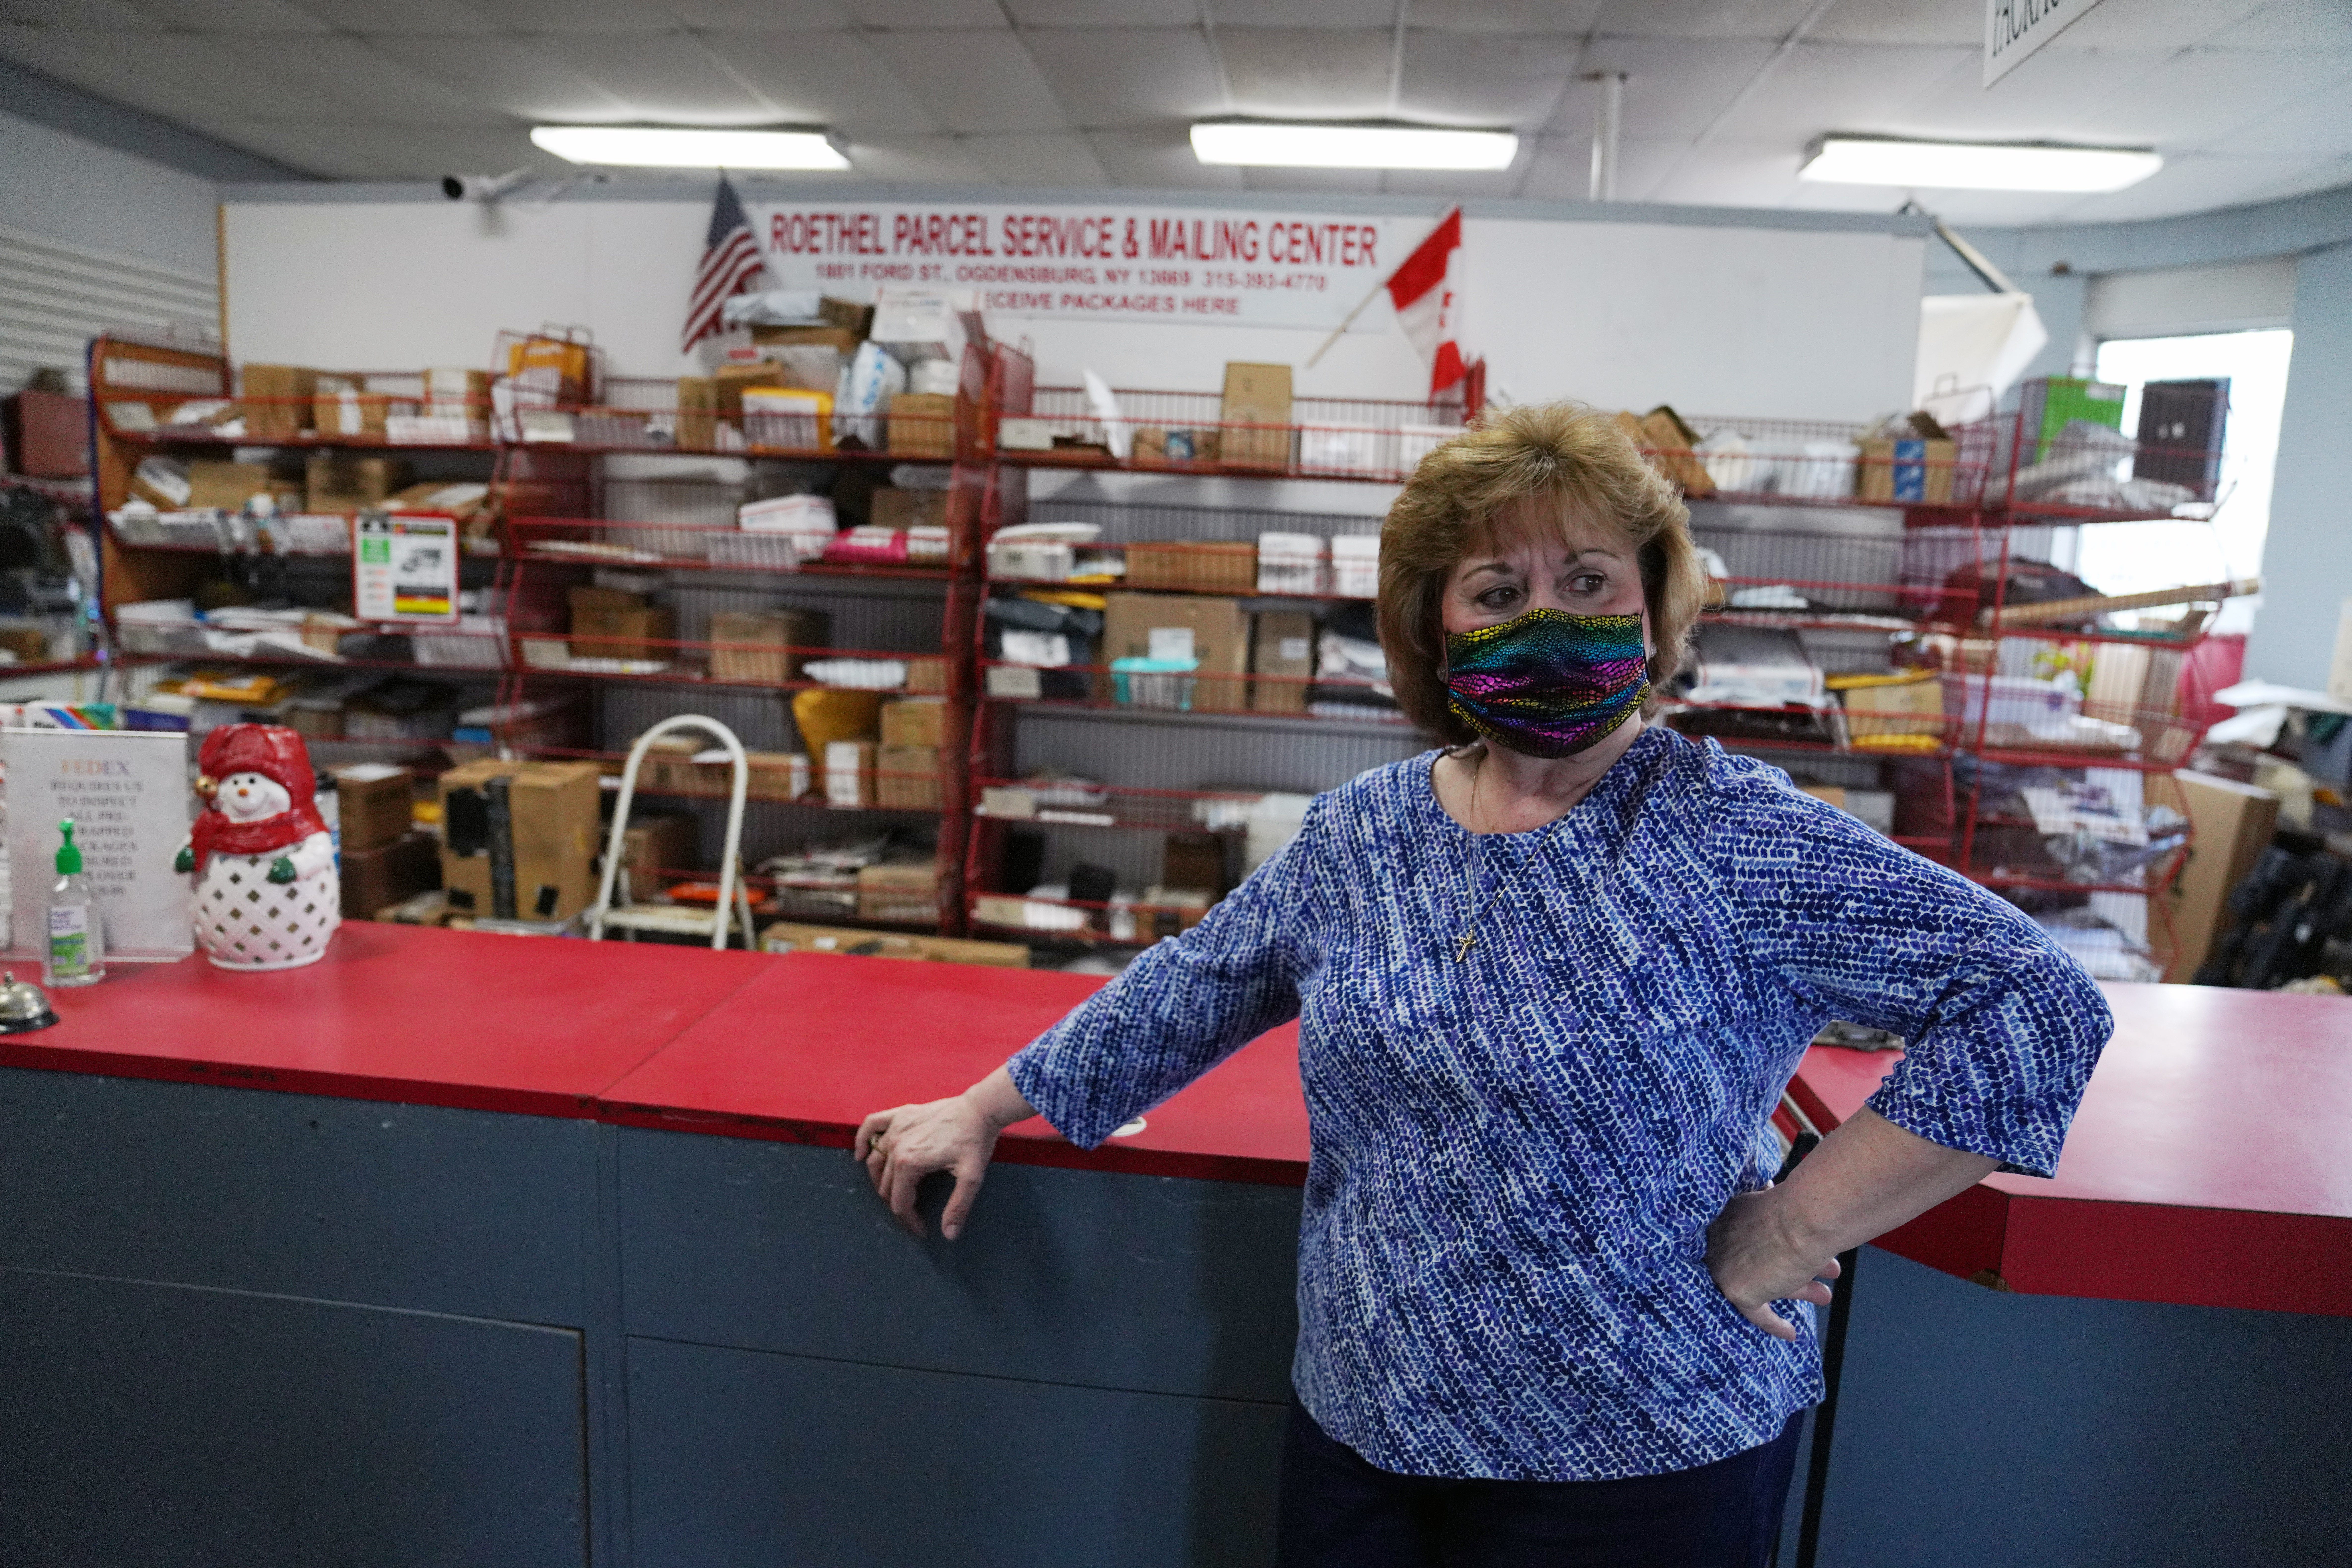 Laurel Roethel operates Roethel Mailing Center & Parcel Service in Ogdensburg. Her store is struggling because the border with Canada is closed, leaving her with many packages that have not been picked up by clients who live across the St. Lawrence River in Ontario.